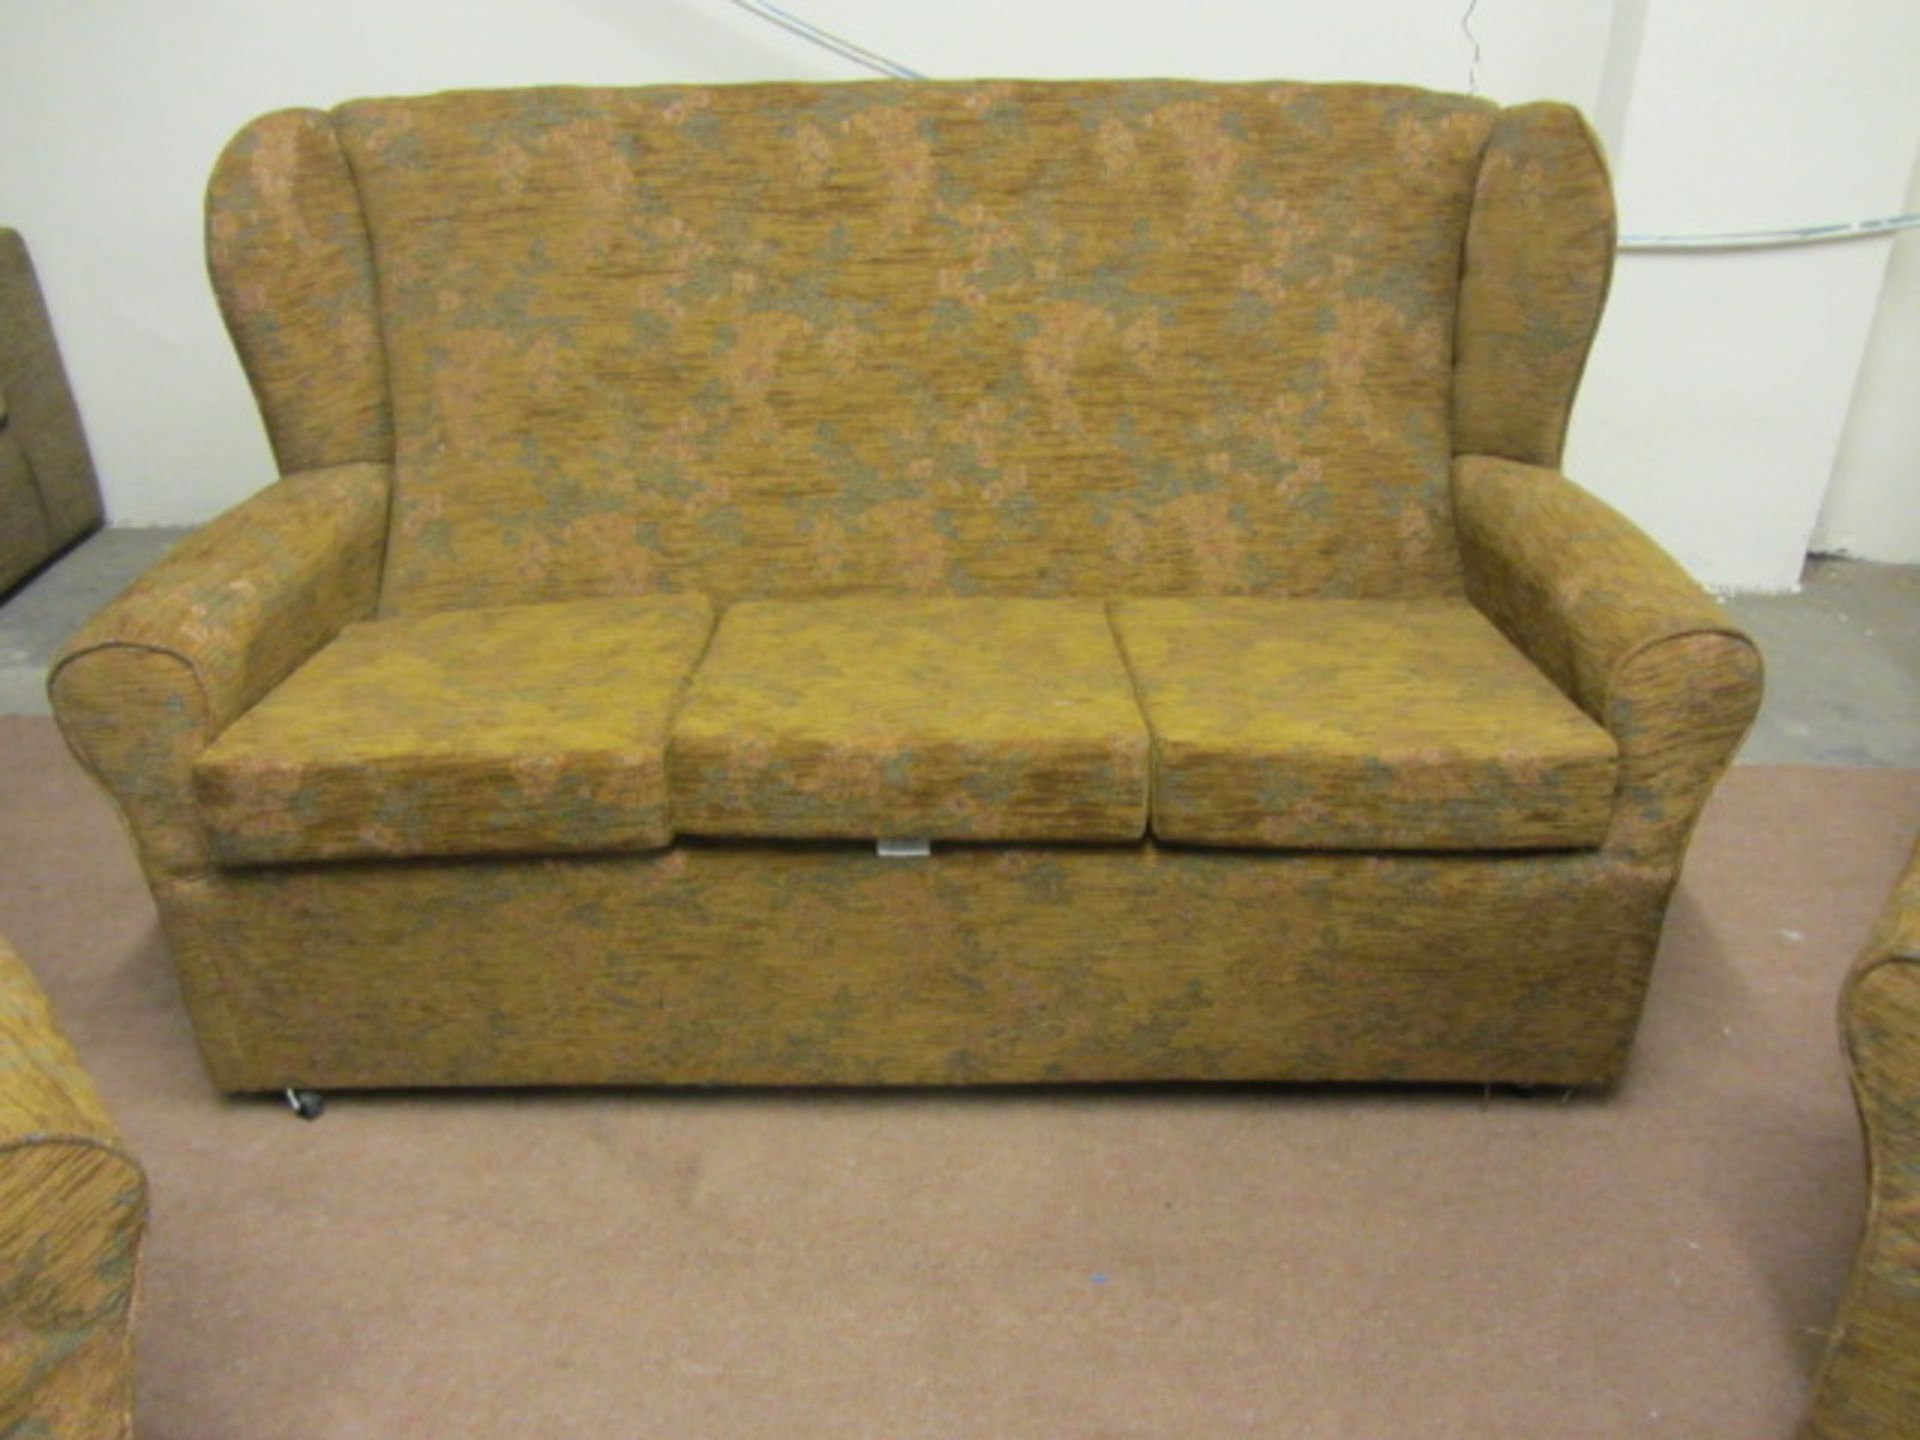 Cottage Style, 3 Seater & 2 Chairs, Brown/Gold Floral Tapestry type fabric, Reversible base cushions - Image 3 of 3